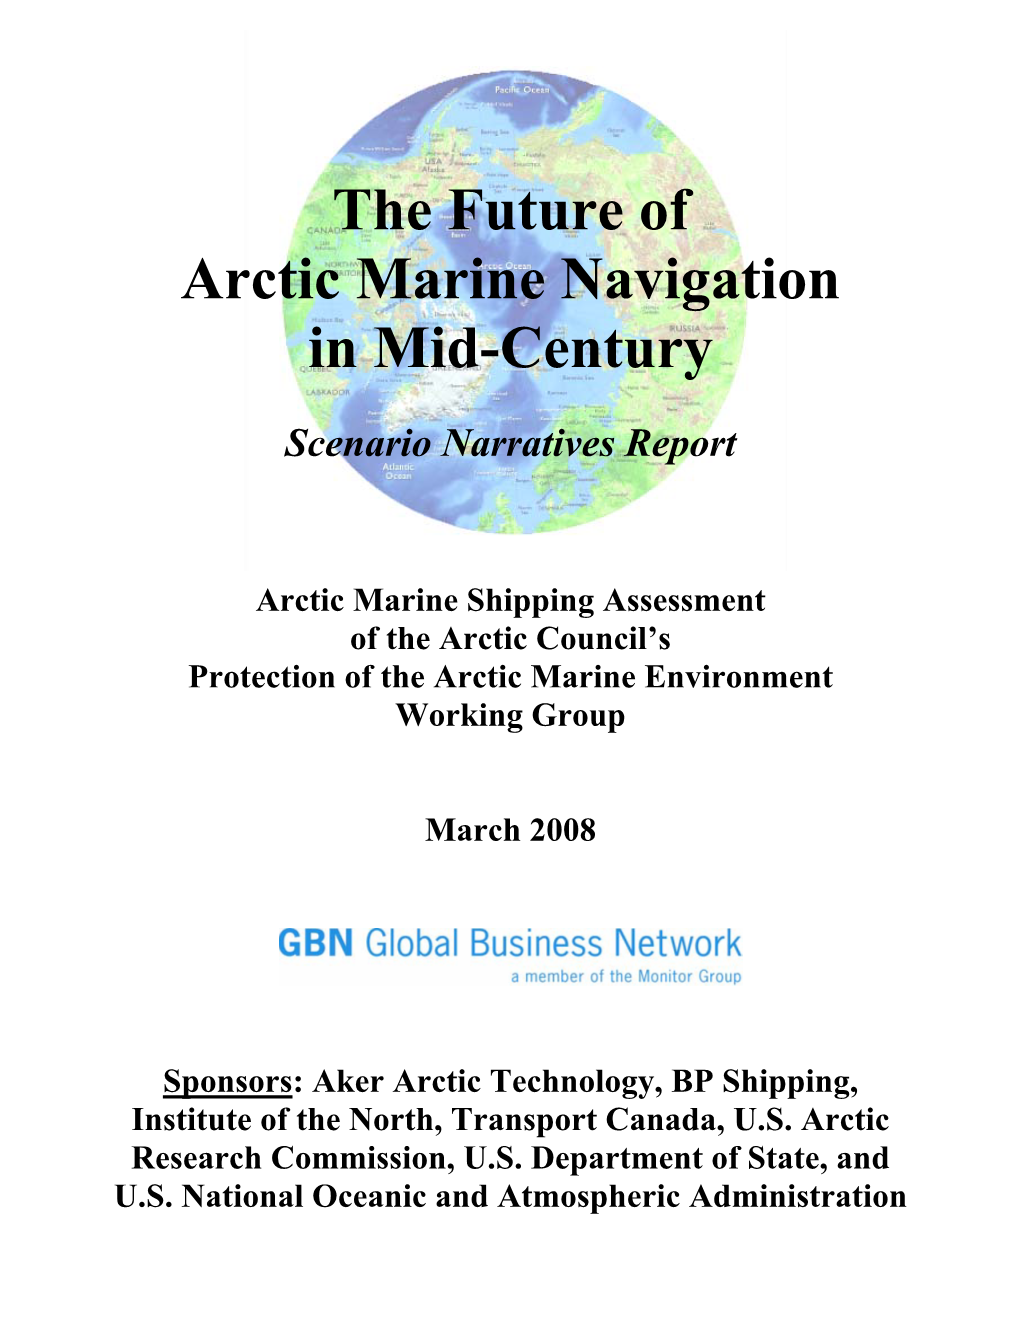 The Future of Arctic Marine Navigation in Mid-Century